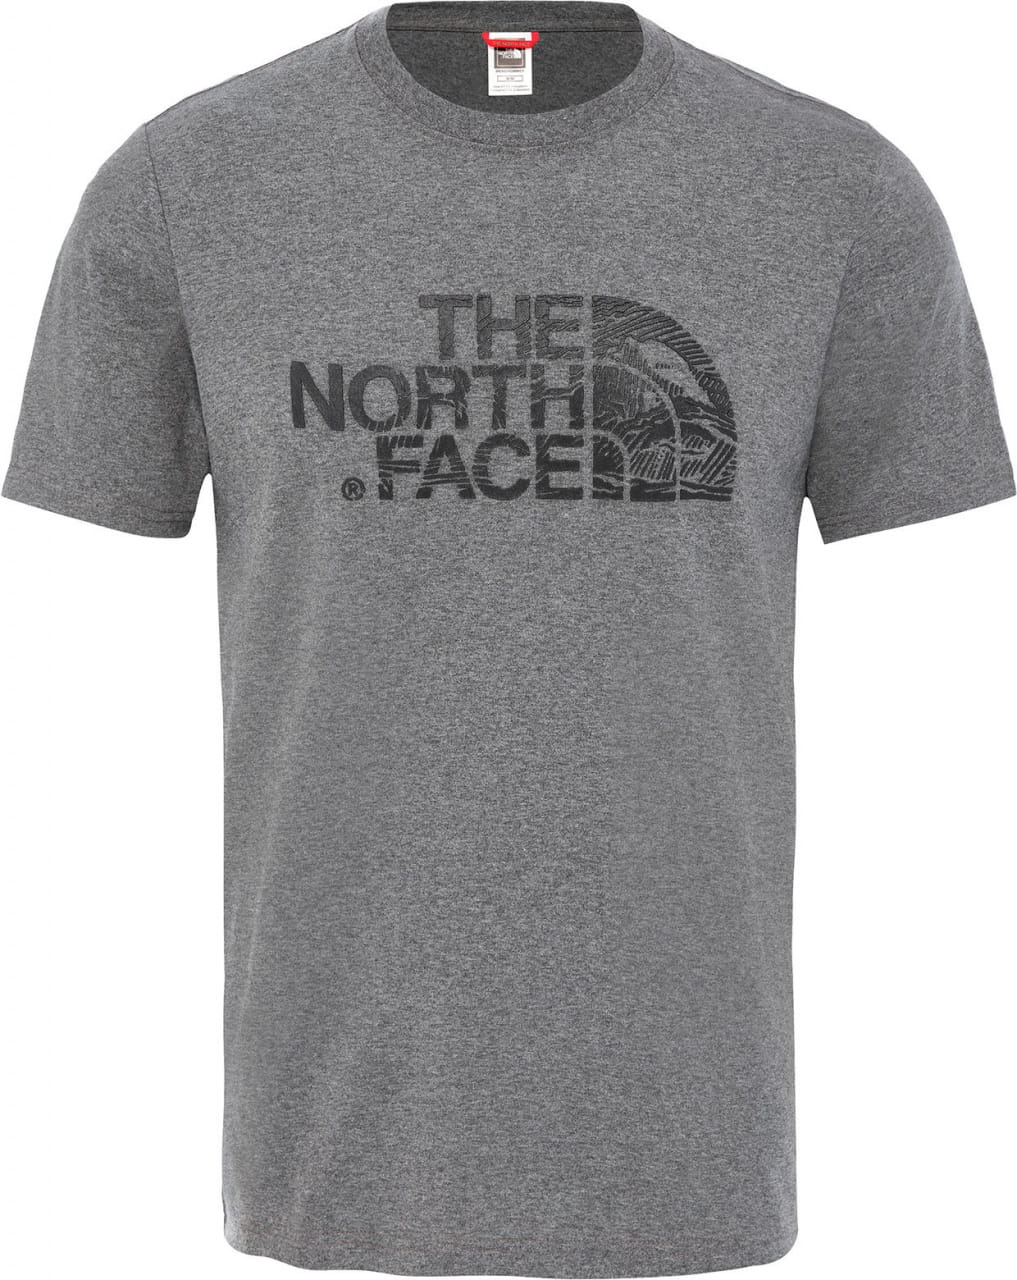 T-Shirts The North Face Men's Woodcut Dome T-Shirt